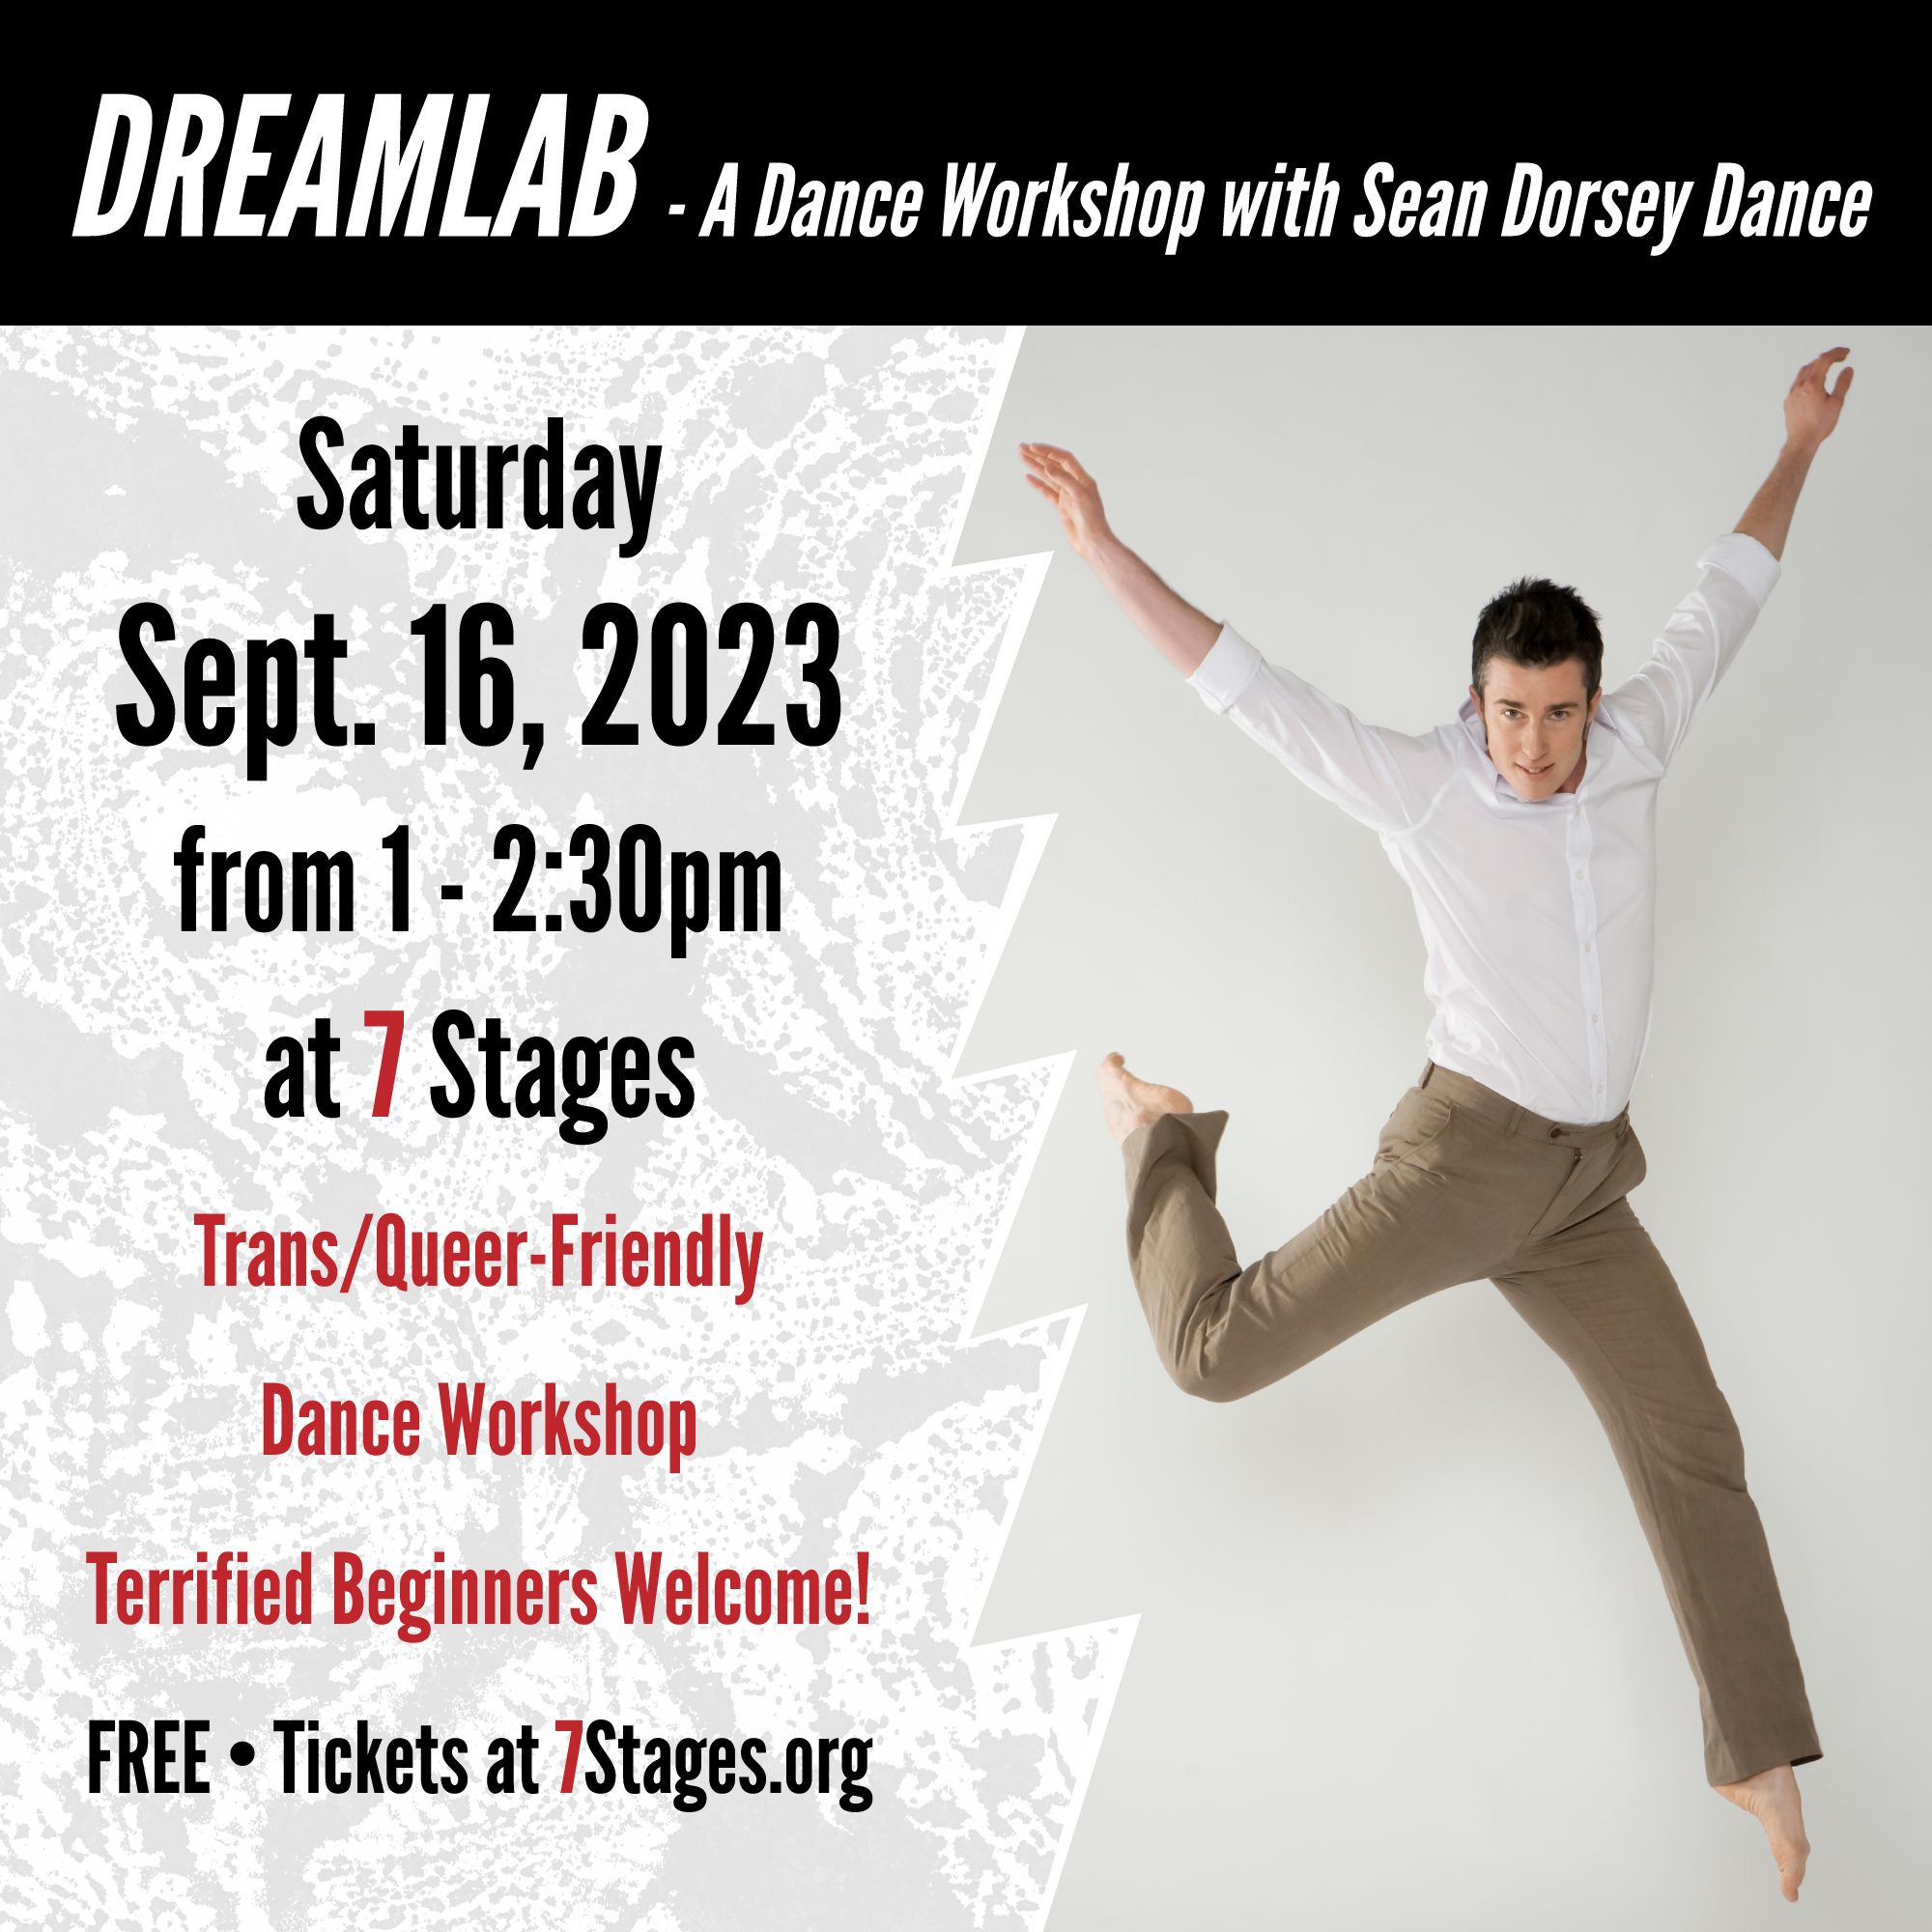 Saturday September 16, 2023 from 1-2:30 P.M. at 7 Stages. Trans and Queer friendly dance workshop. Terrified beginners welcome!